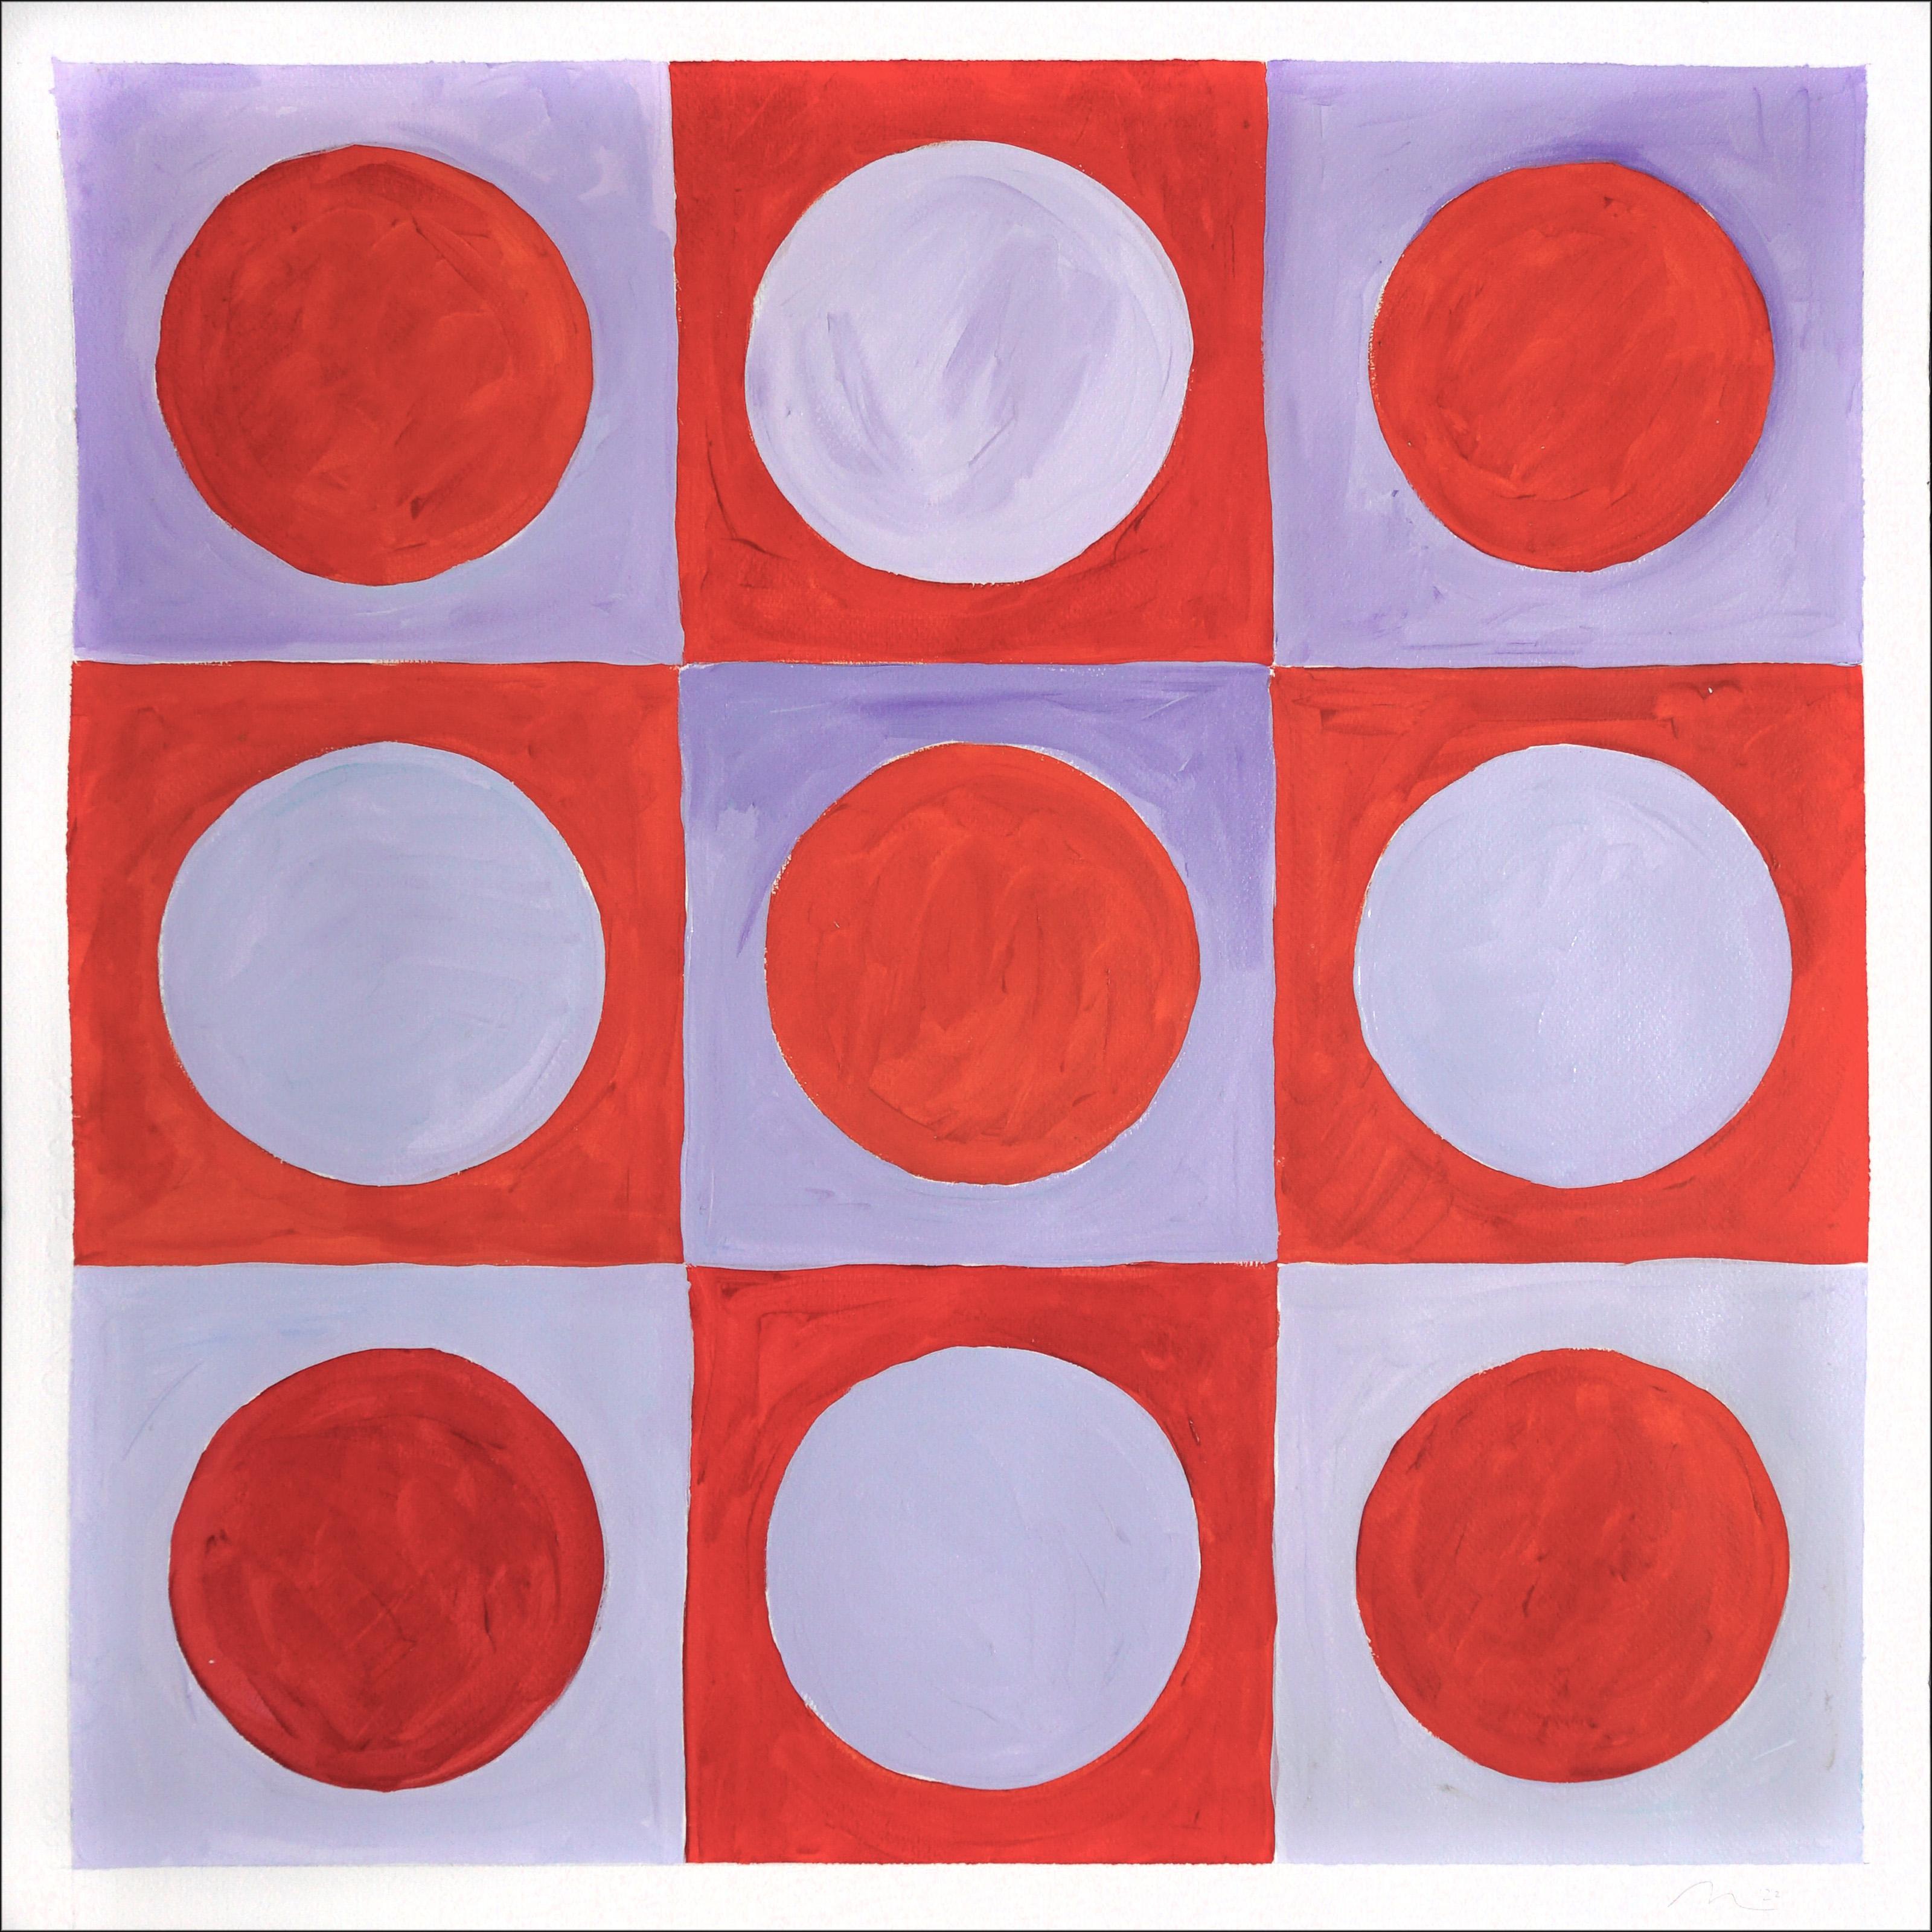 Natalia Roman Abstract Painting - Royal Violet Checkers, Red Ruby Circles and Squares, Bauhaus Tile Pattern, Paper